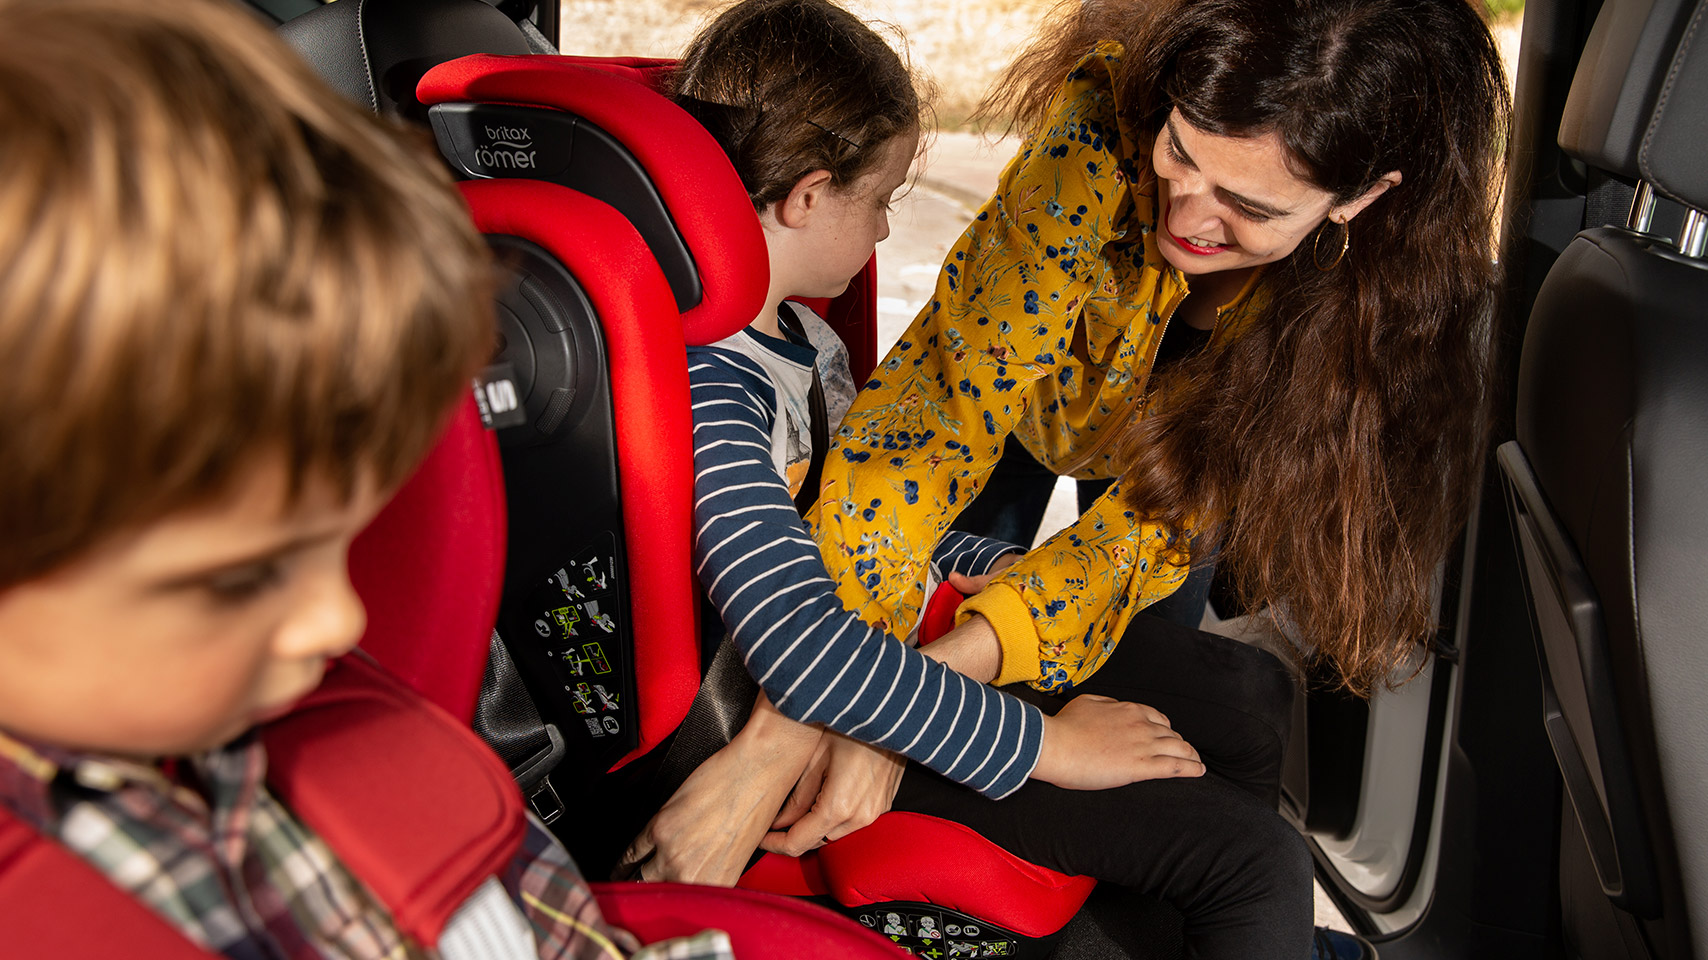 SEAT´s 10 golden rules for safely transporting children in your car